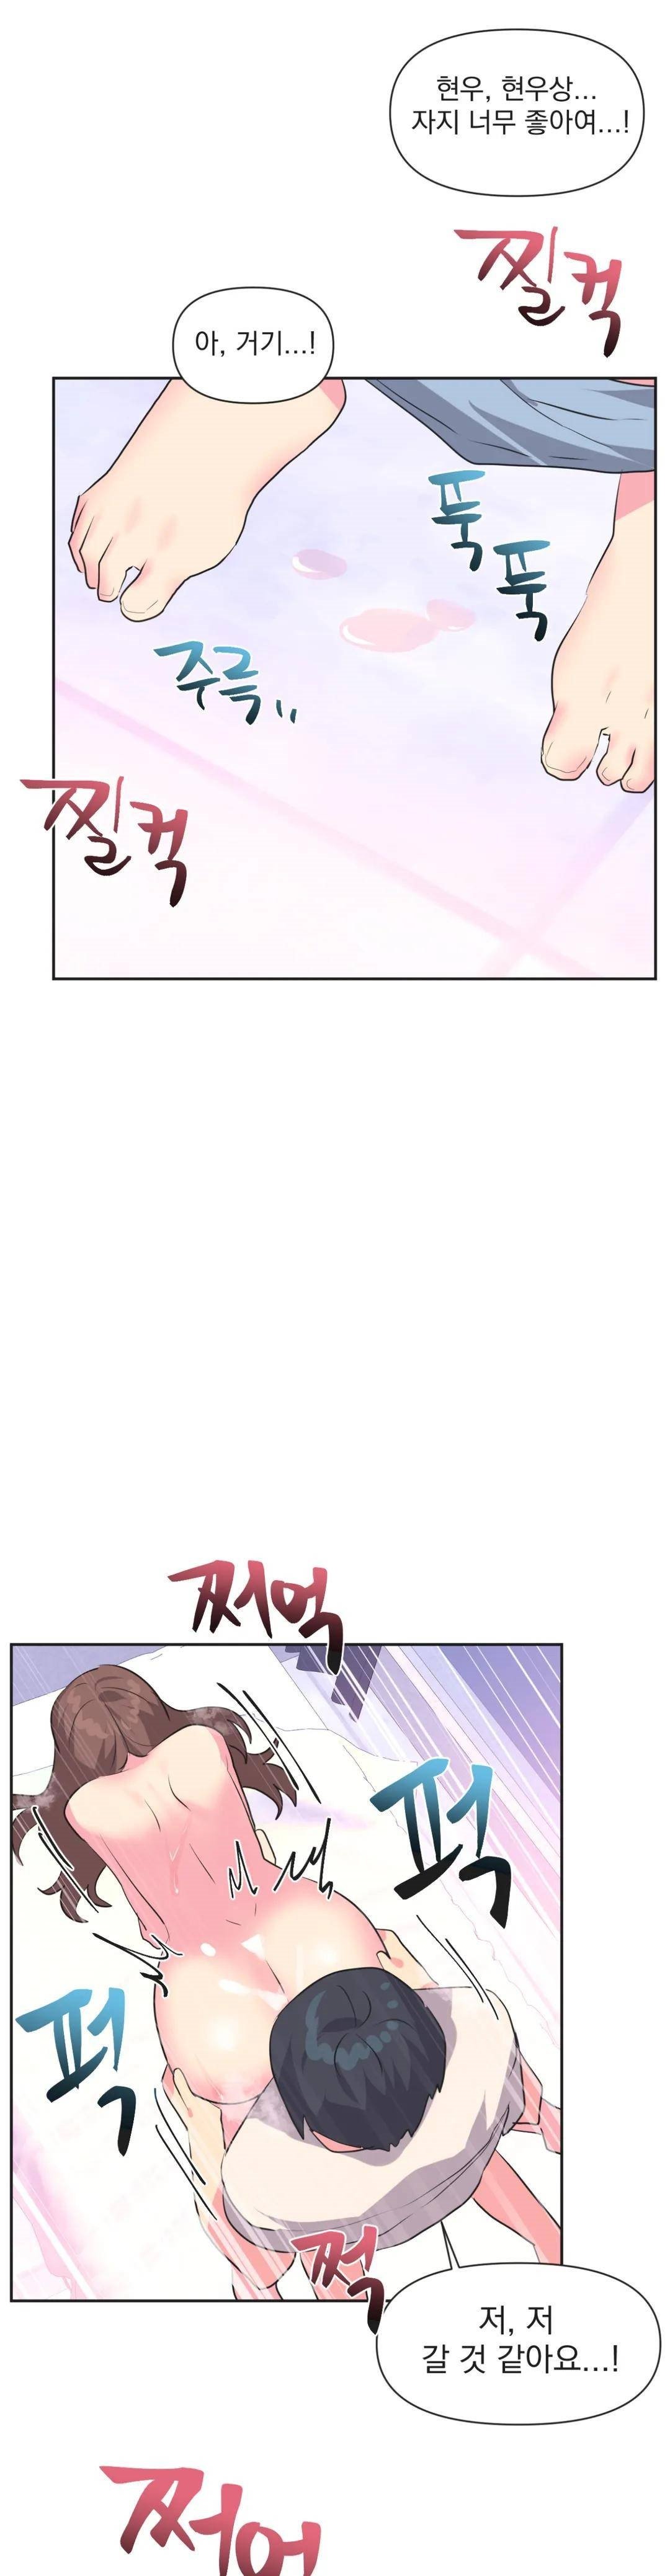 release-raw-chap-8-22